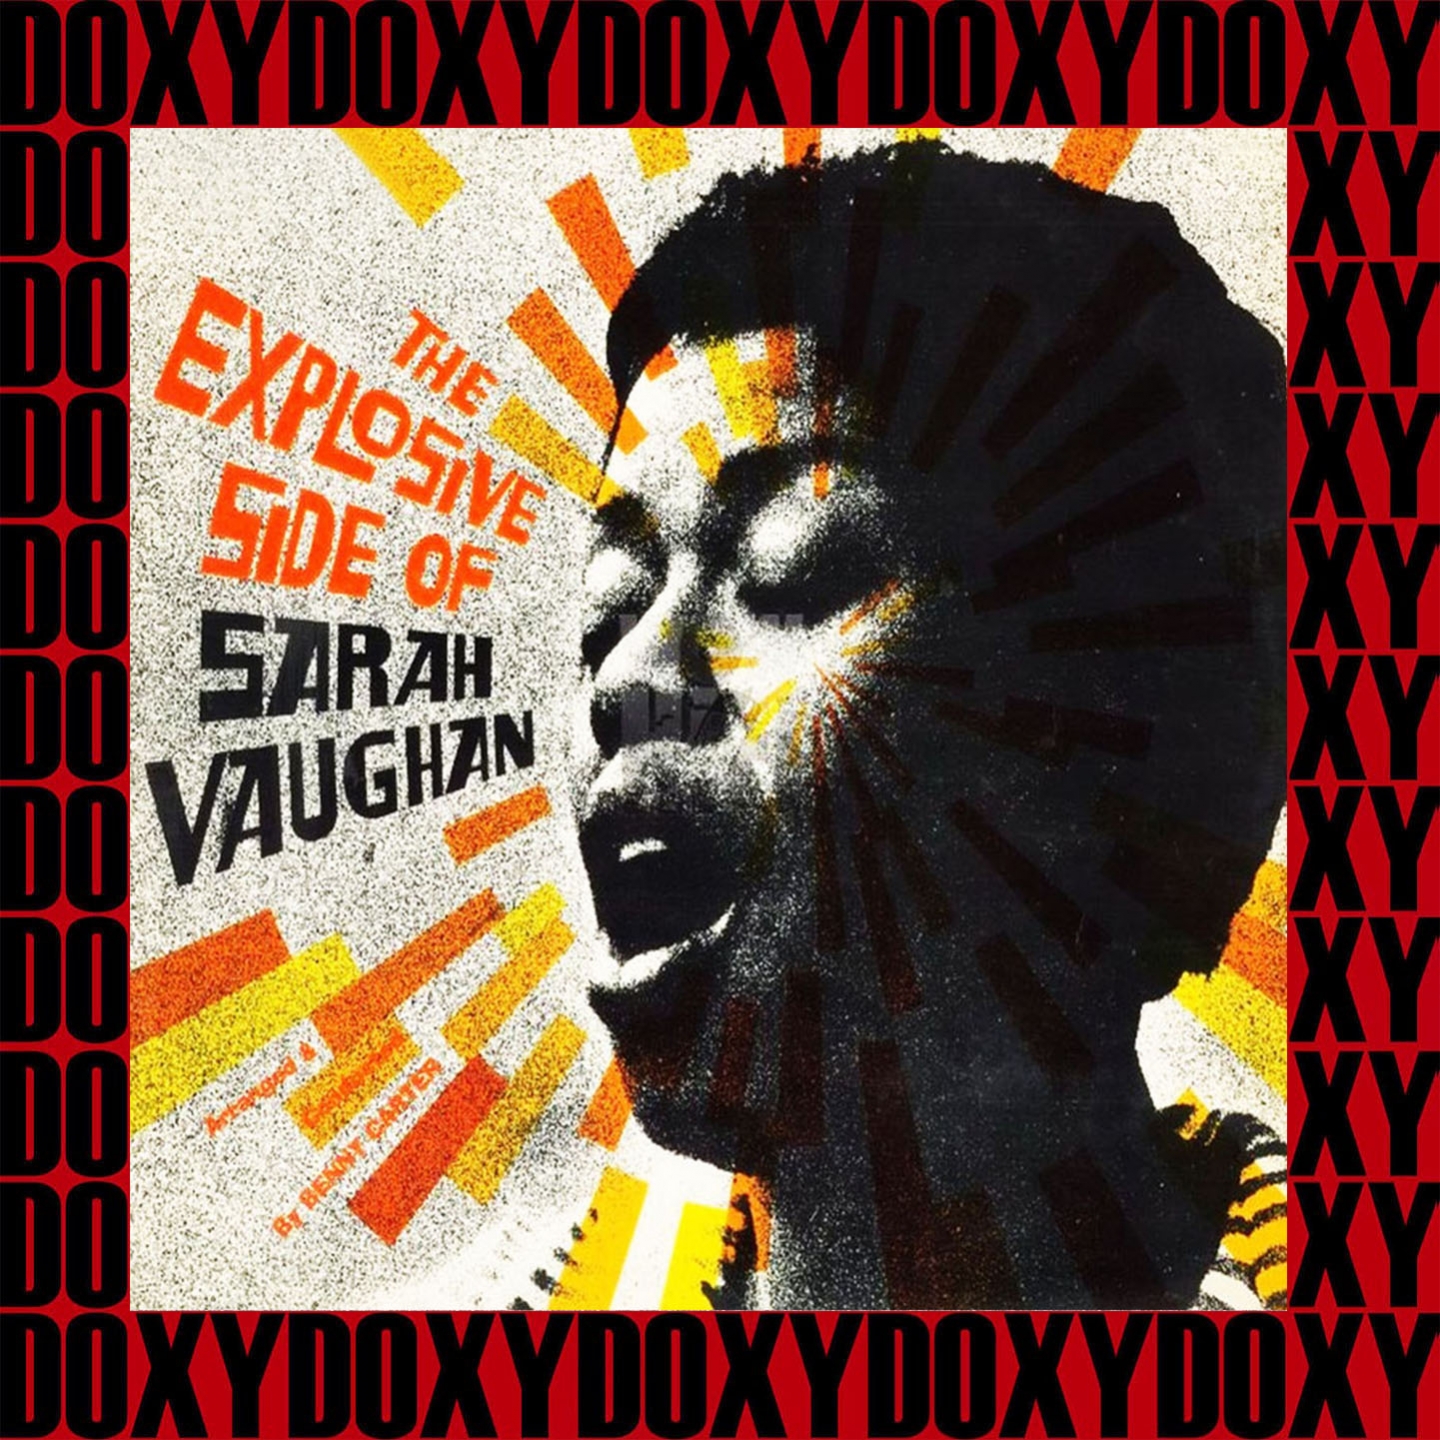 The Explosive Side Of Sarah Vaughan (Remastered Version) (Doxy Collection)